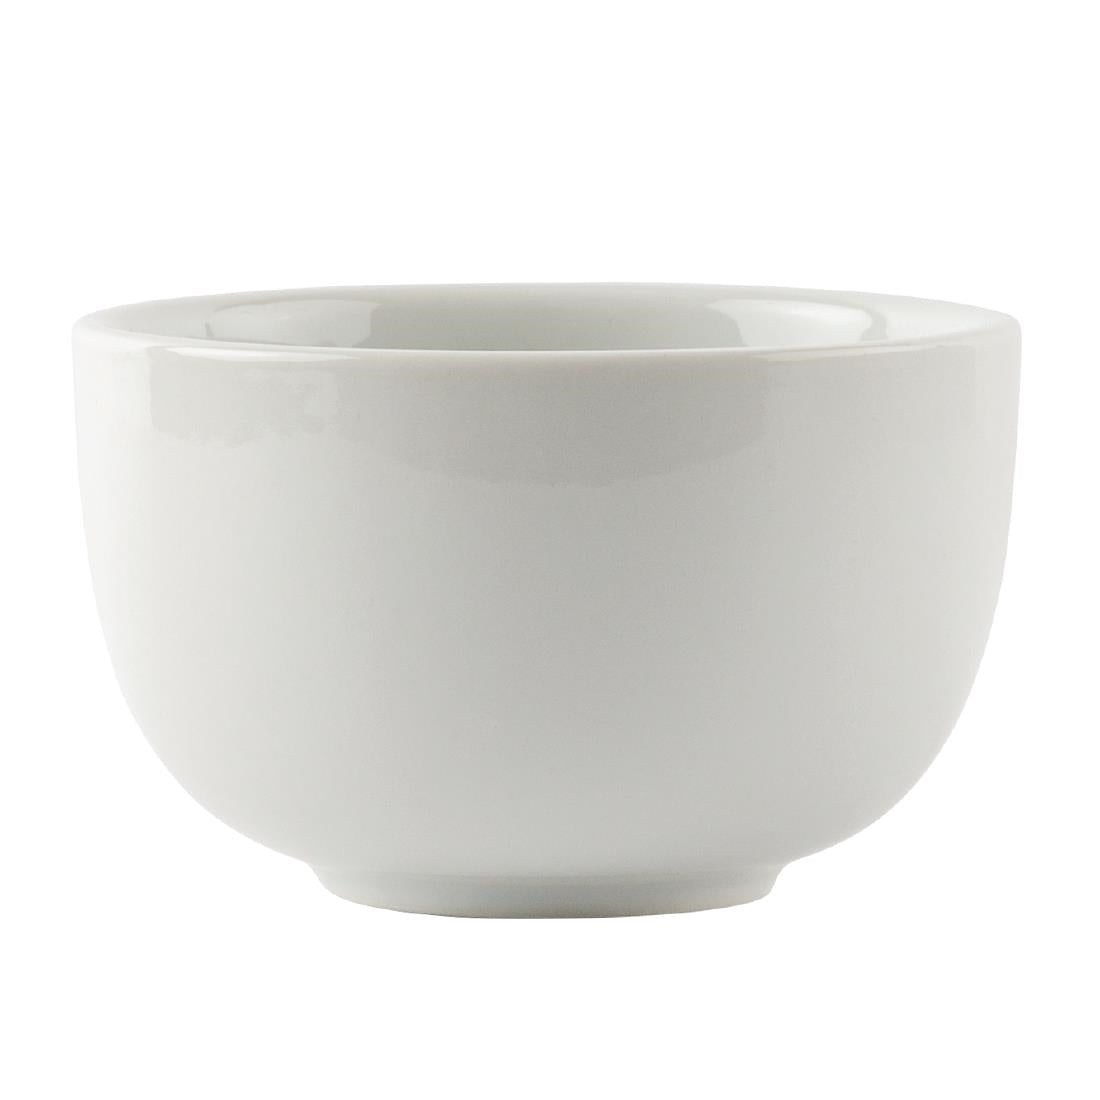 C250 Olympia Whiteware Sugar Bowls 95mm 200ml (Pack of 12)